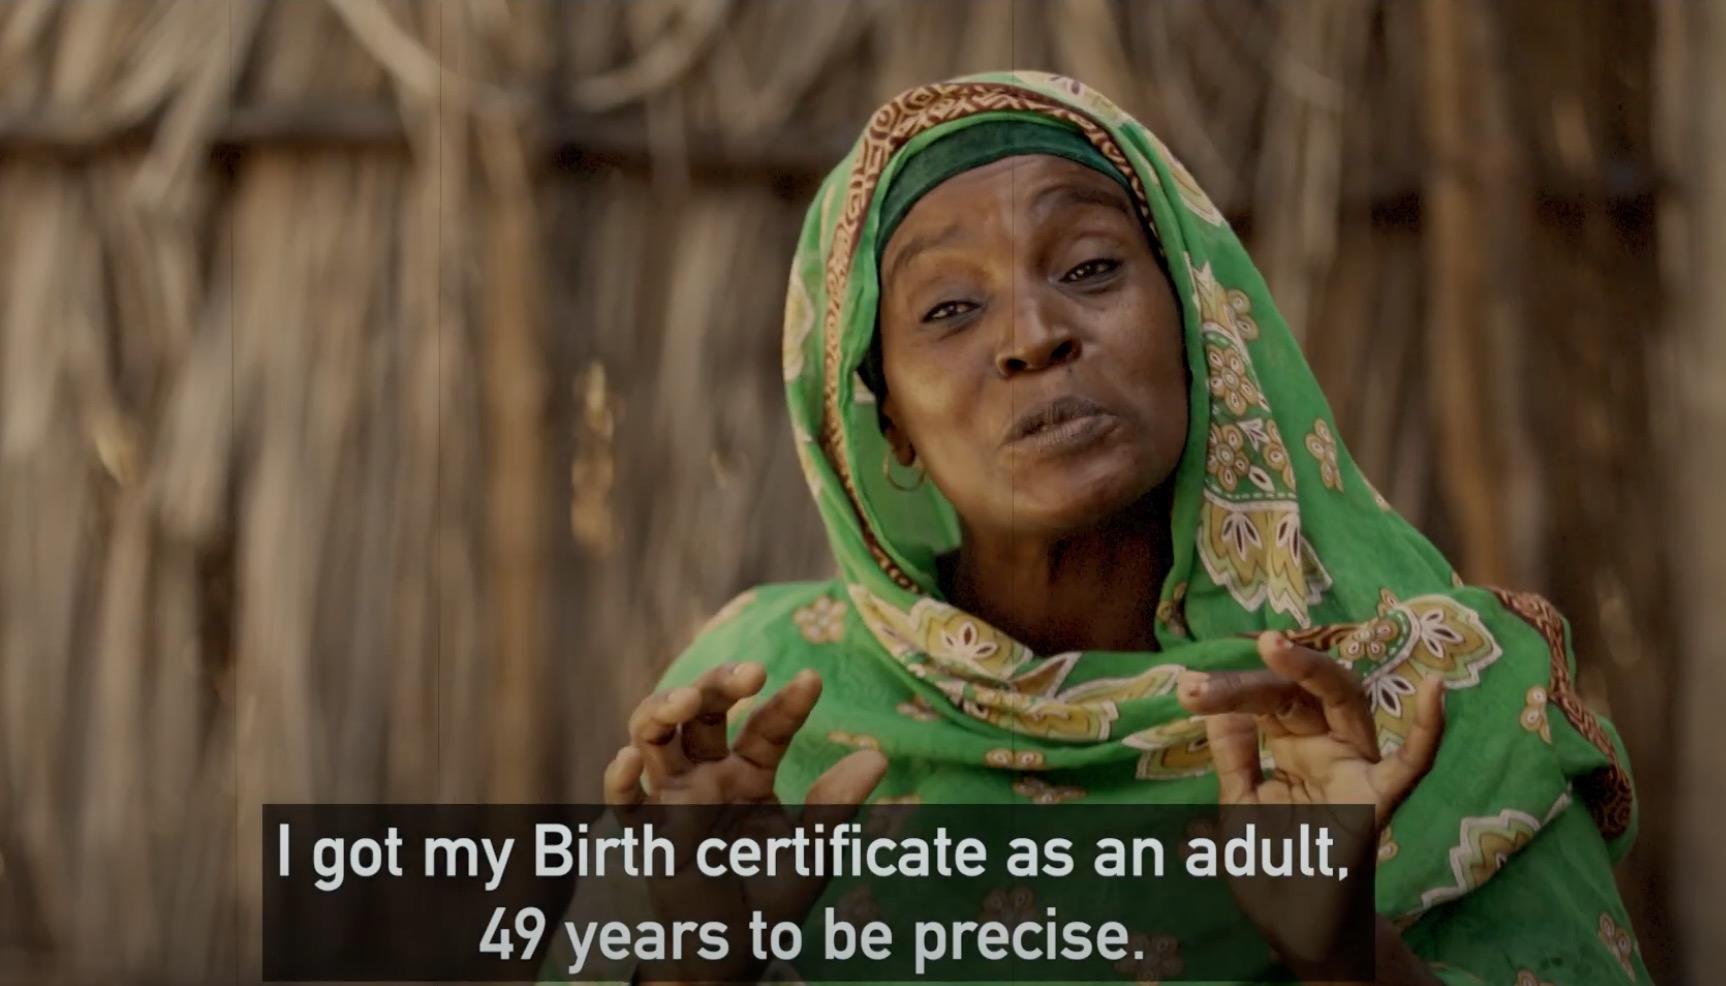 VIDEO: Promoting Access to Birth Registration